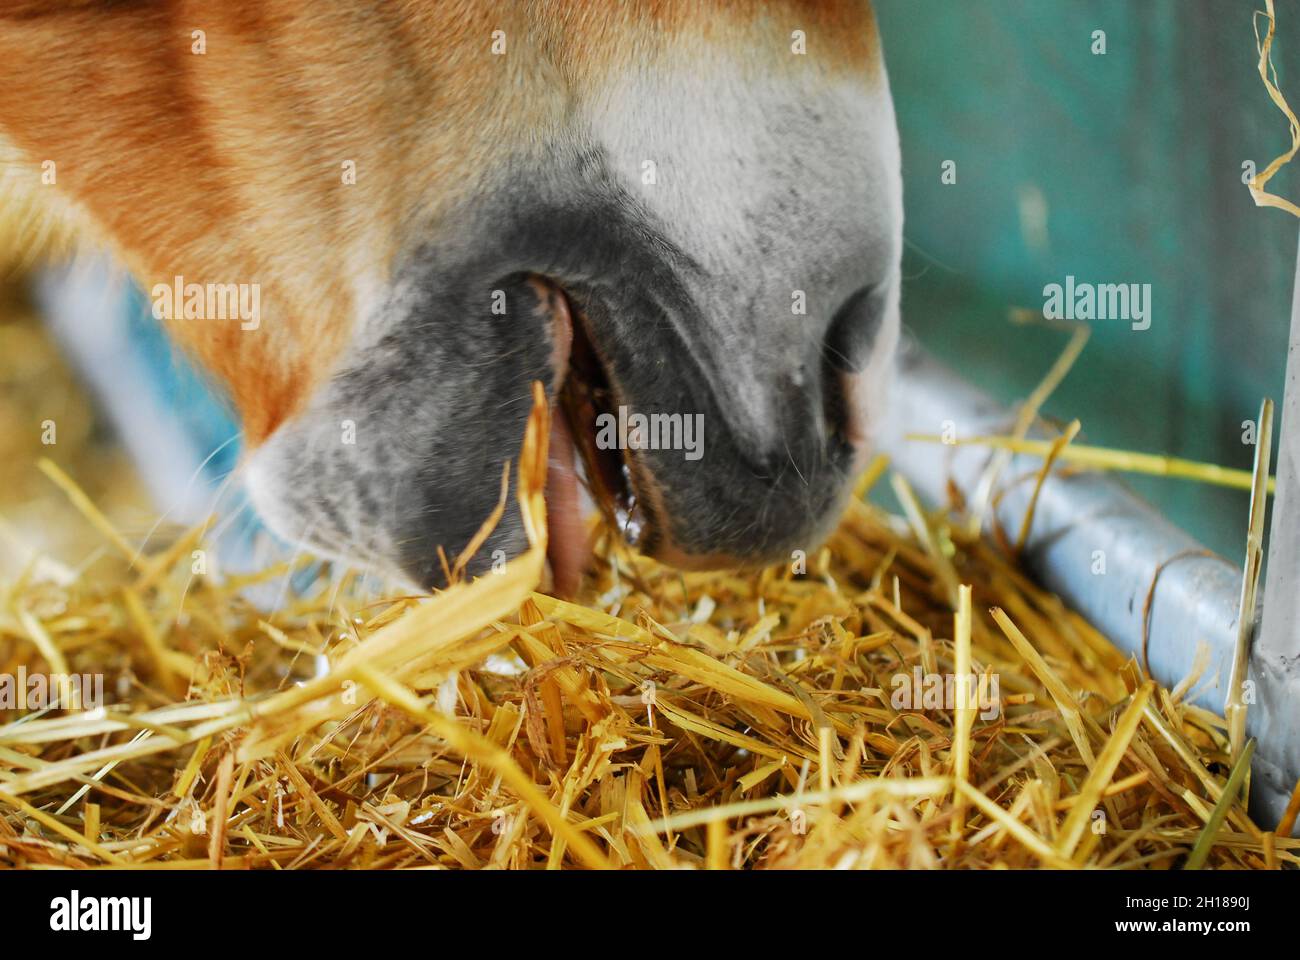 Open mouth of a horse eating straw Stock Photo